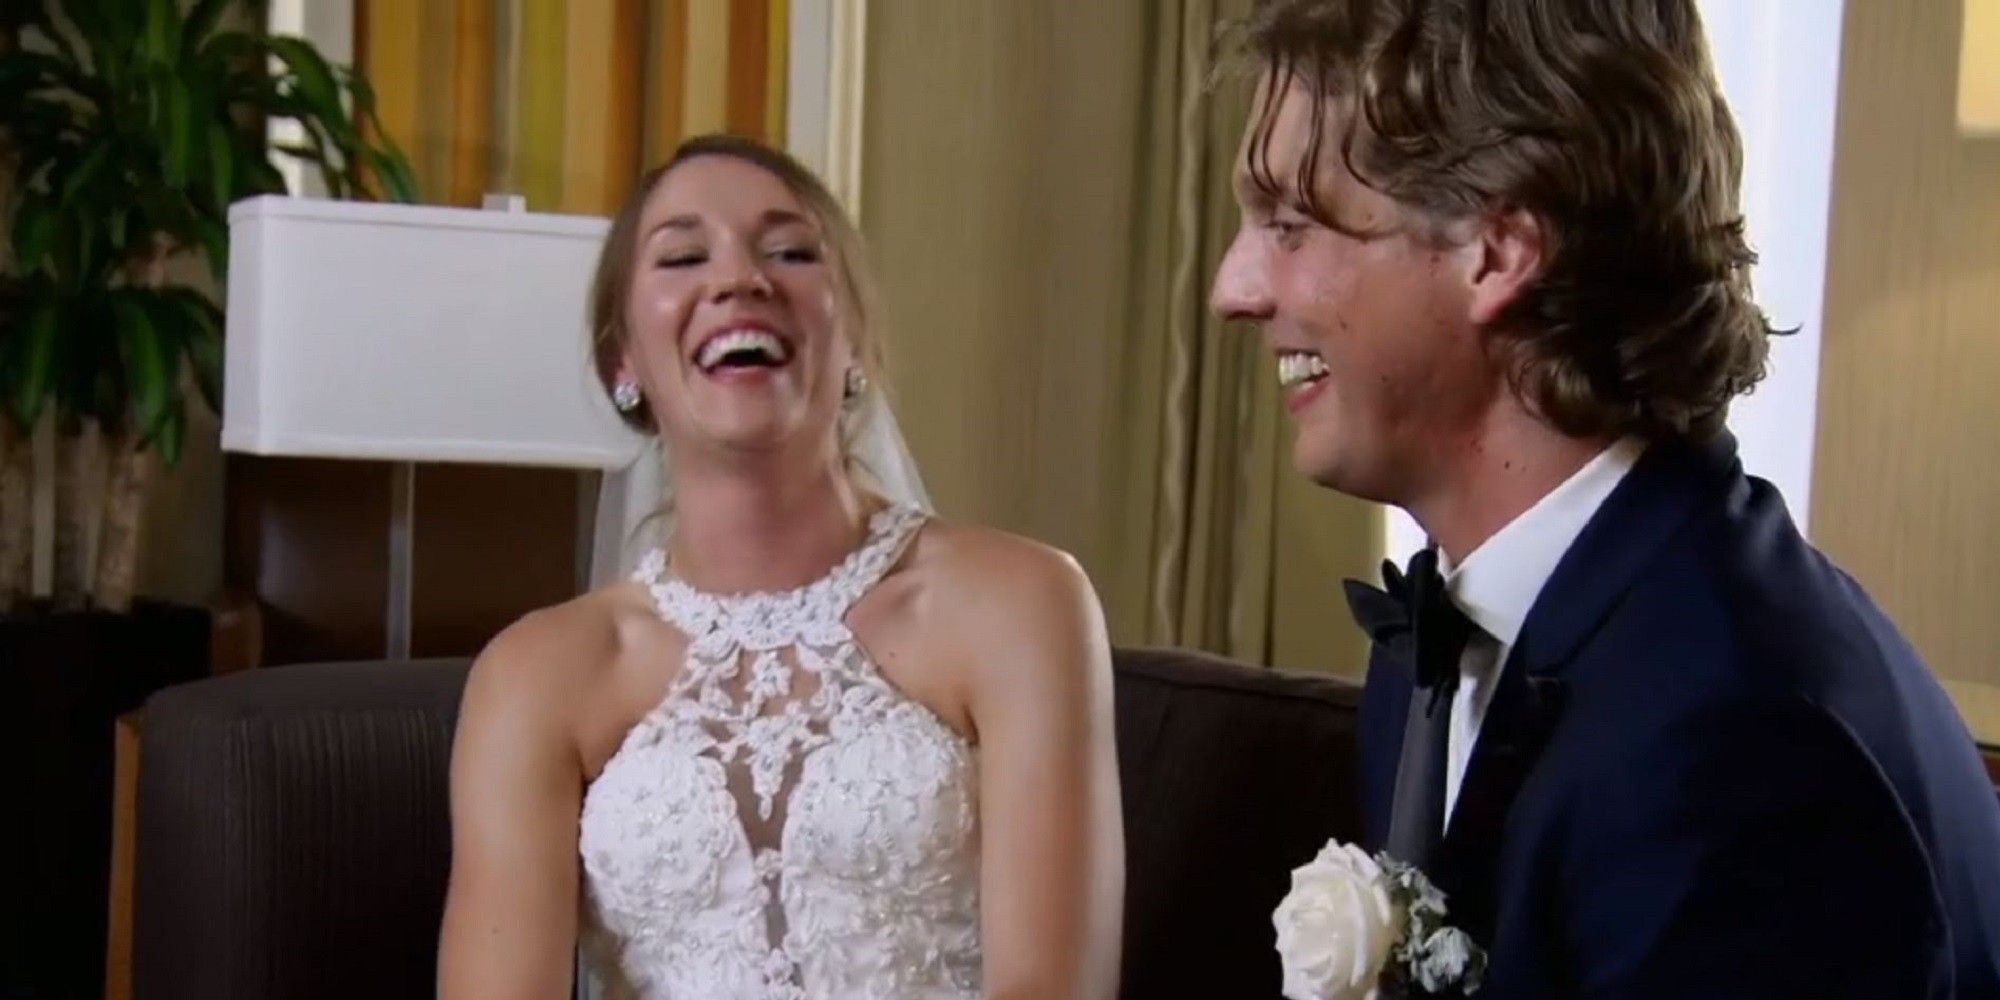 Austin Jessica Married At First Sight